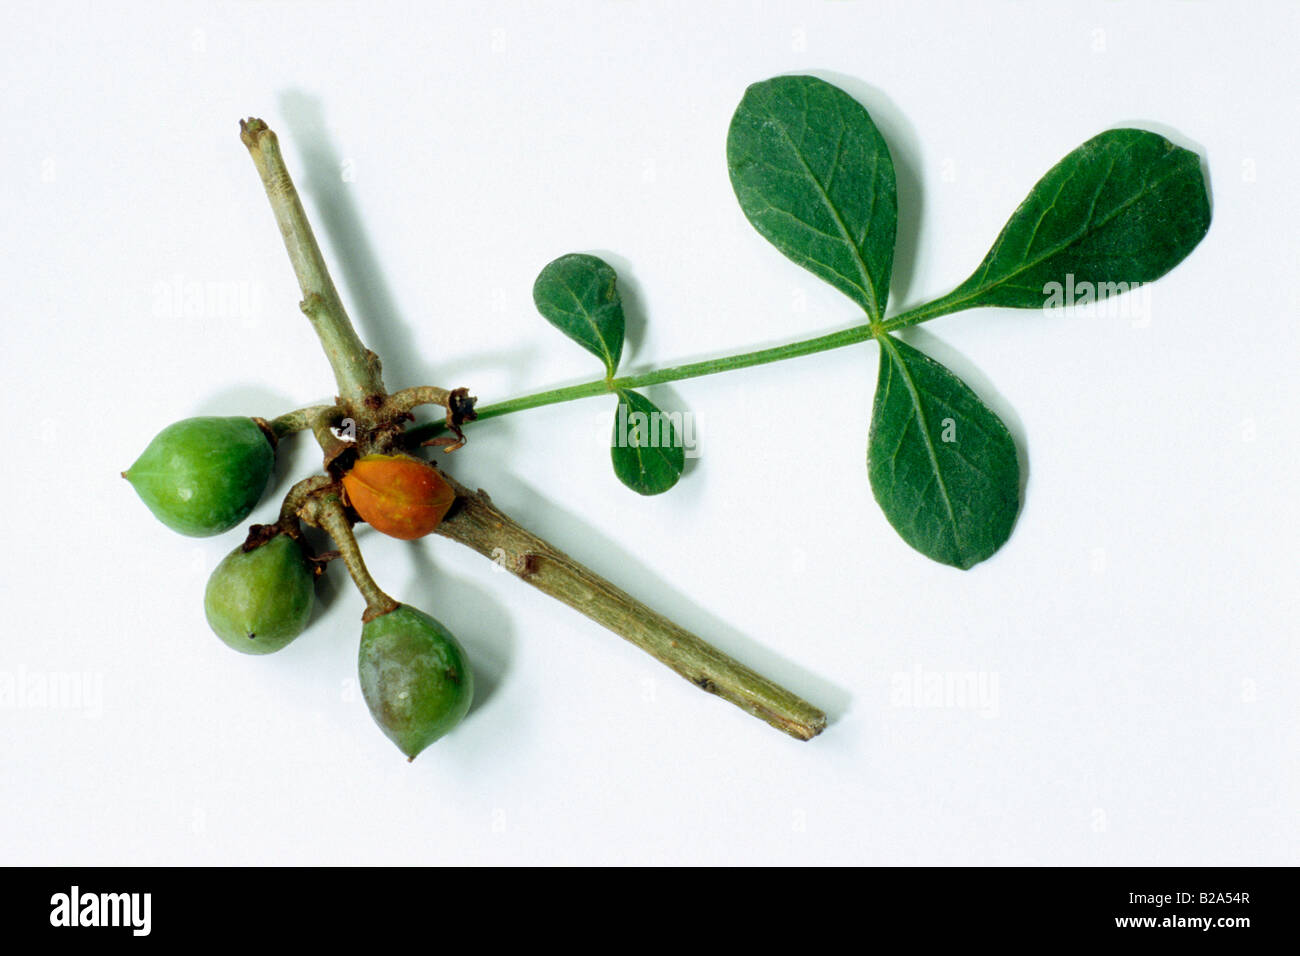 Abyssinian Myrrh (Commiphora abyssinica), twig with leaves, studio picture Stock Photo